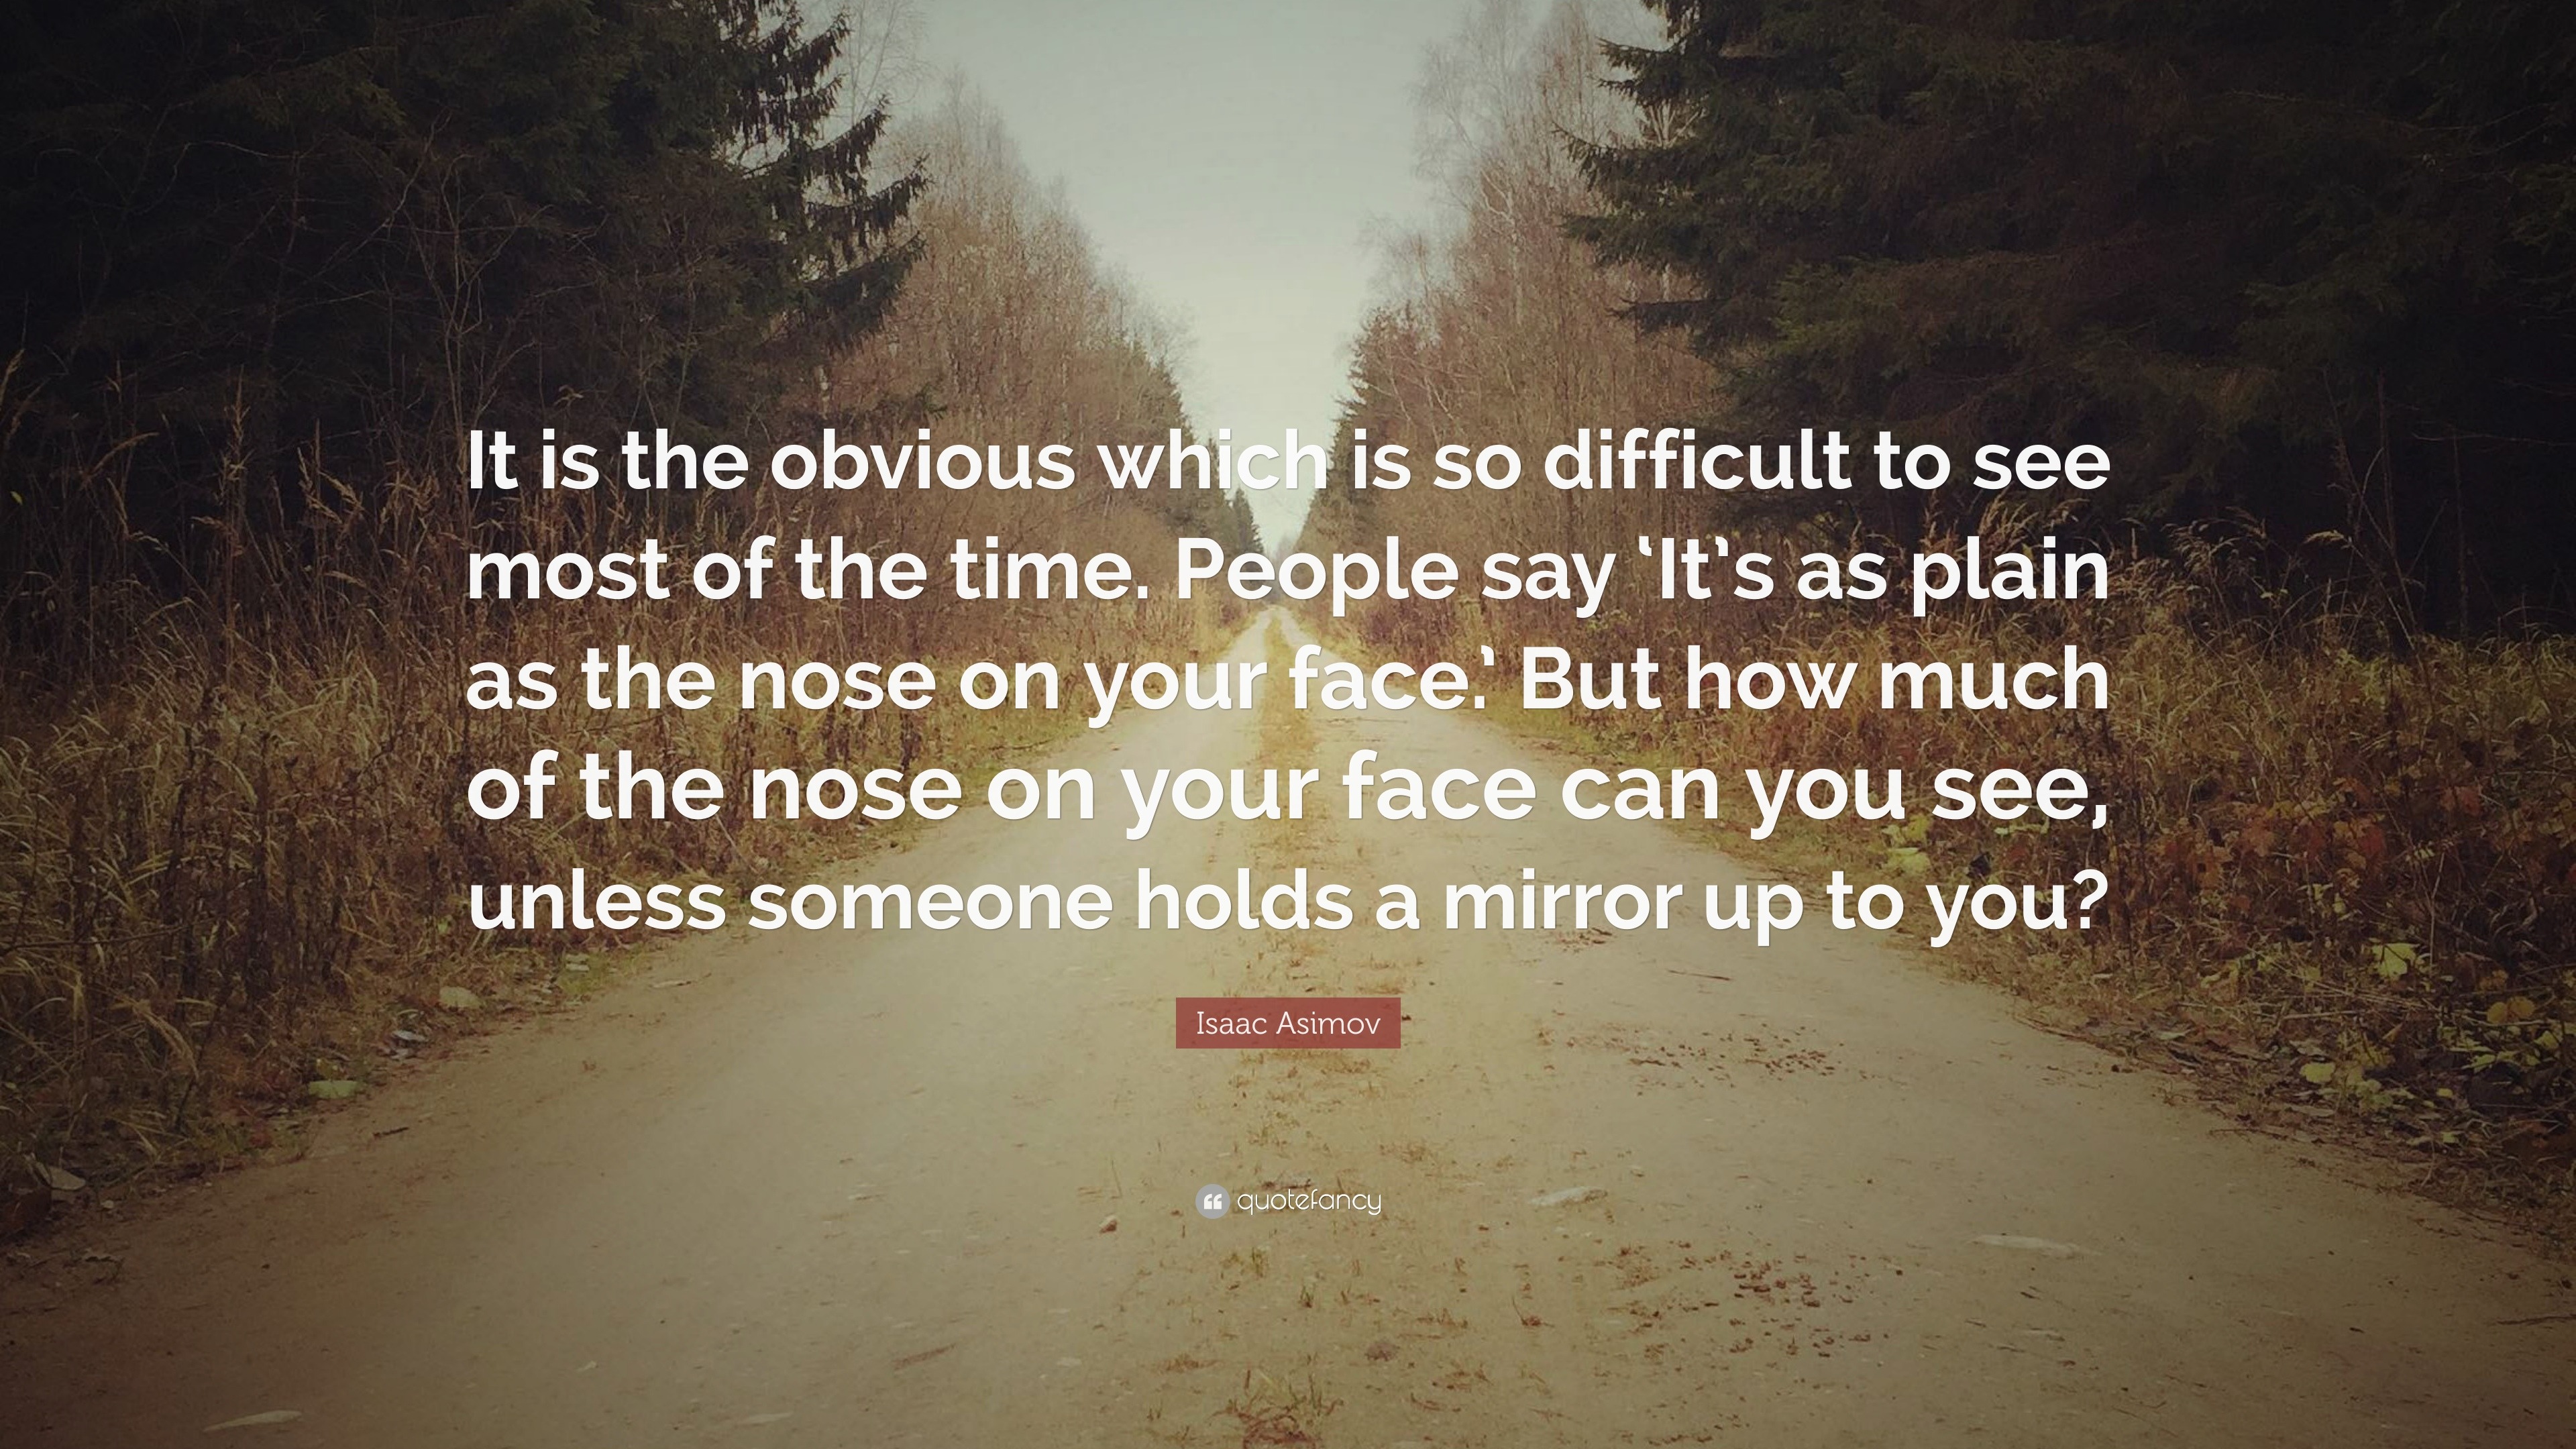 Isaac Asimov Quote: “It is the obvious which is so difficult to see ...